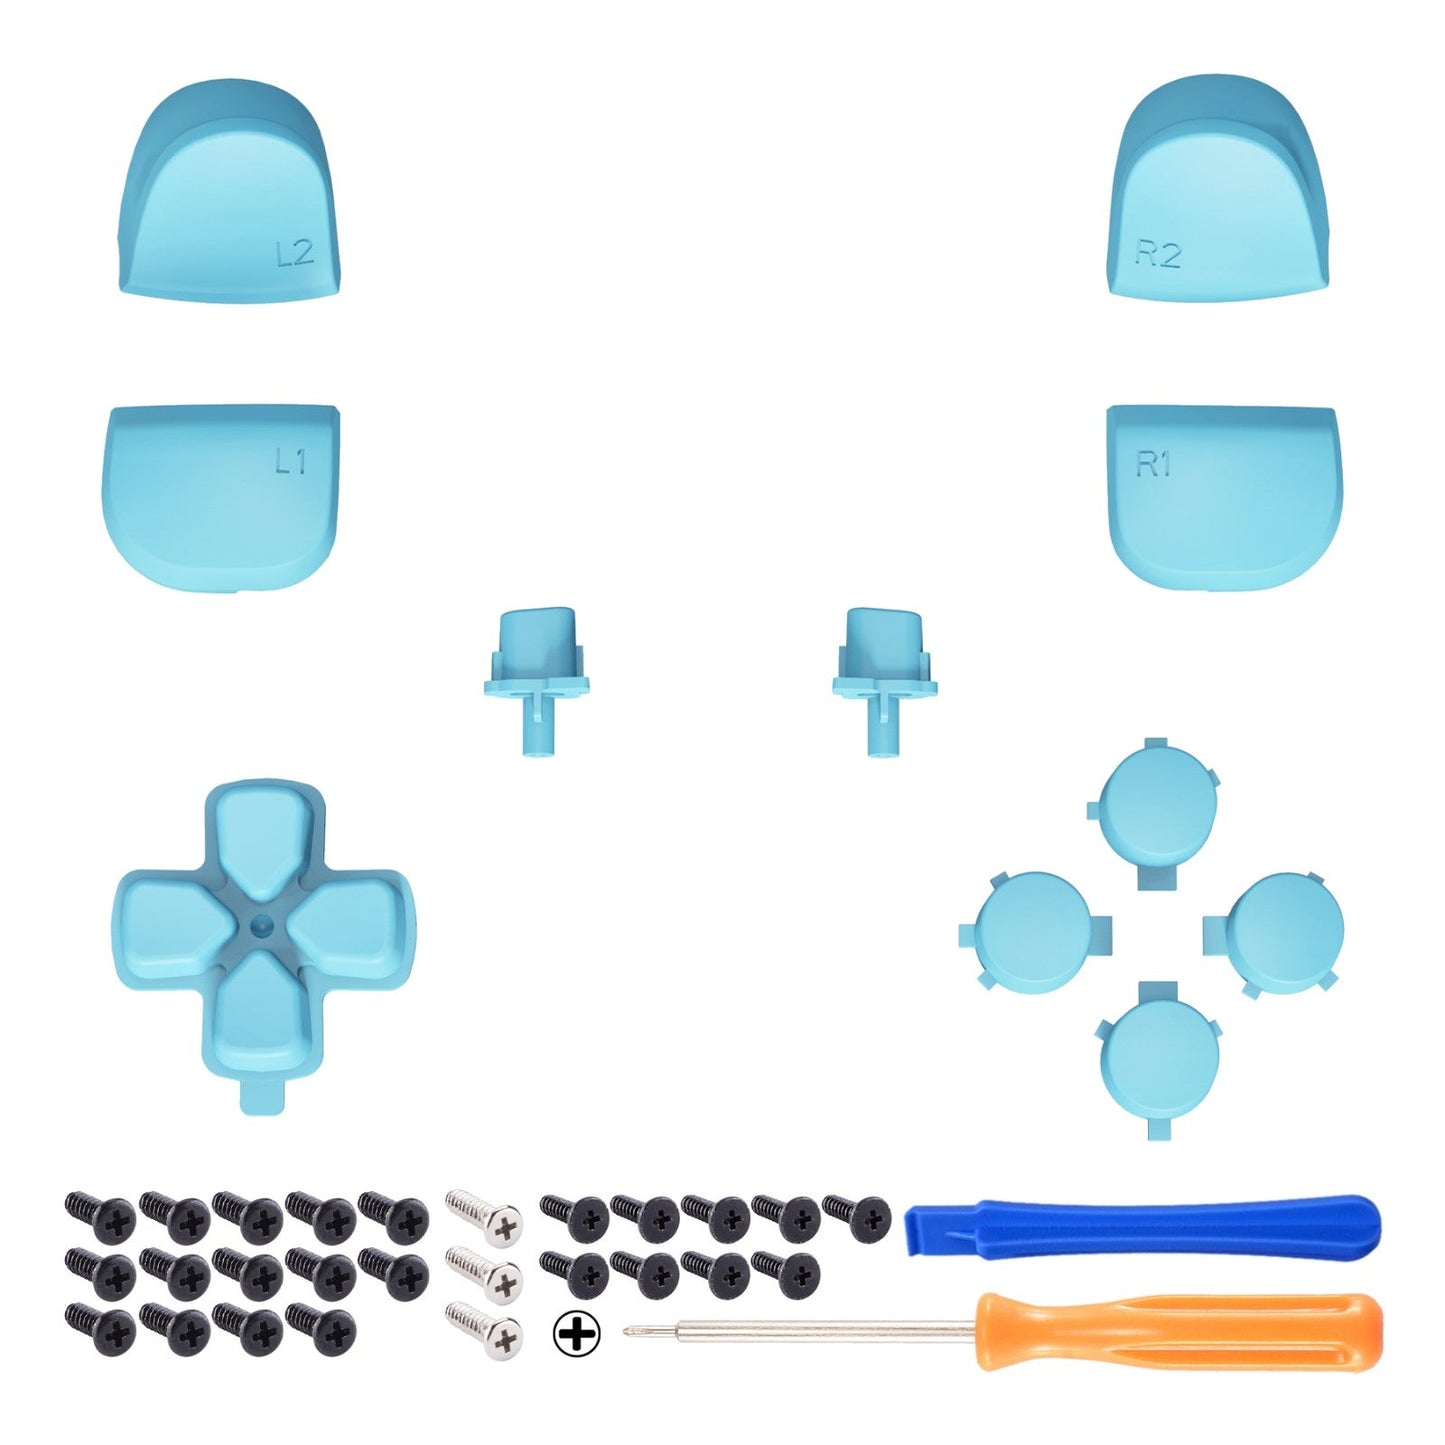 eXtremeRate Retail Replacement D-pad R1 L1 R2 L2 Triggers Share Options Face Buttons, Heaven Blue Full Set Buttons Compatible with ps5 Controller BDM-010 & BDM-020 - JPF1011G2